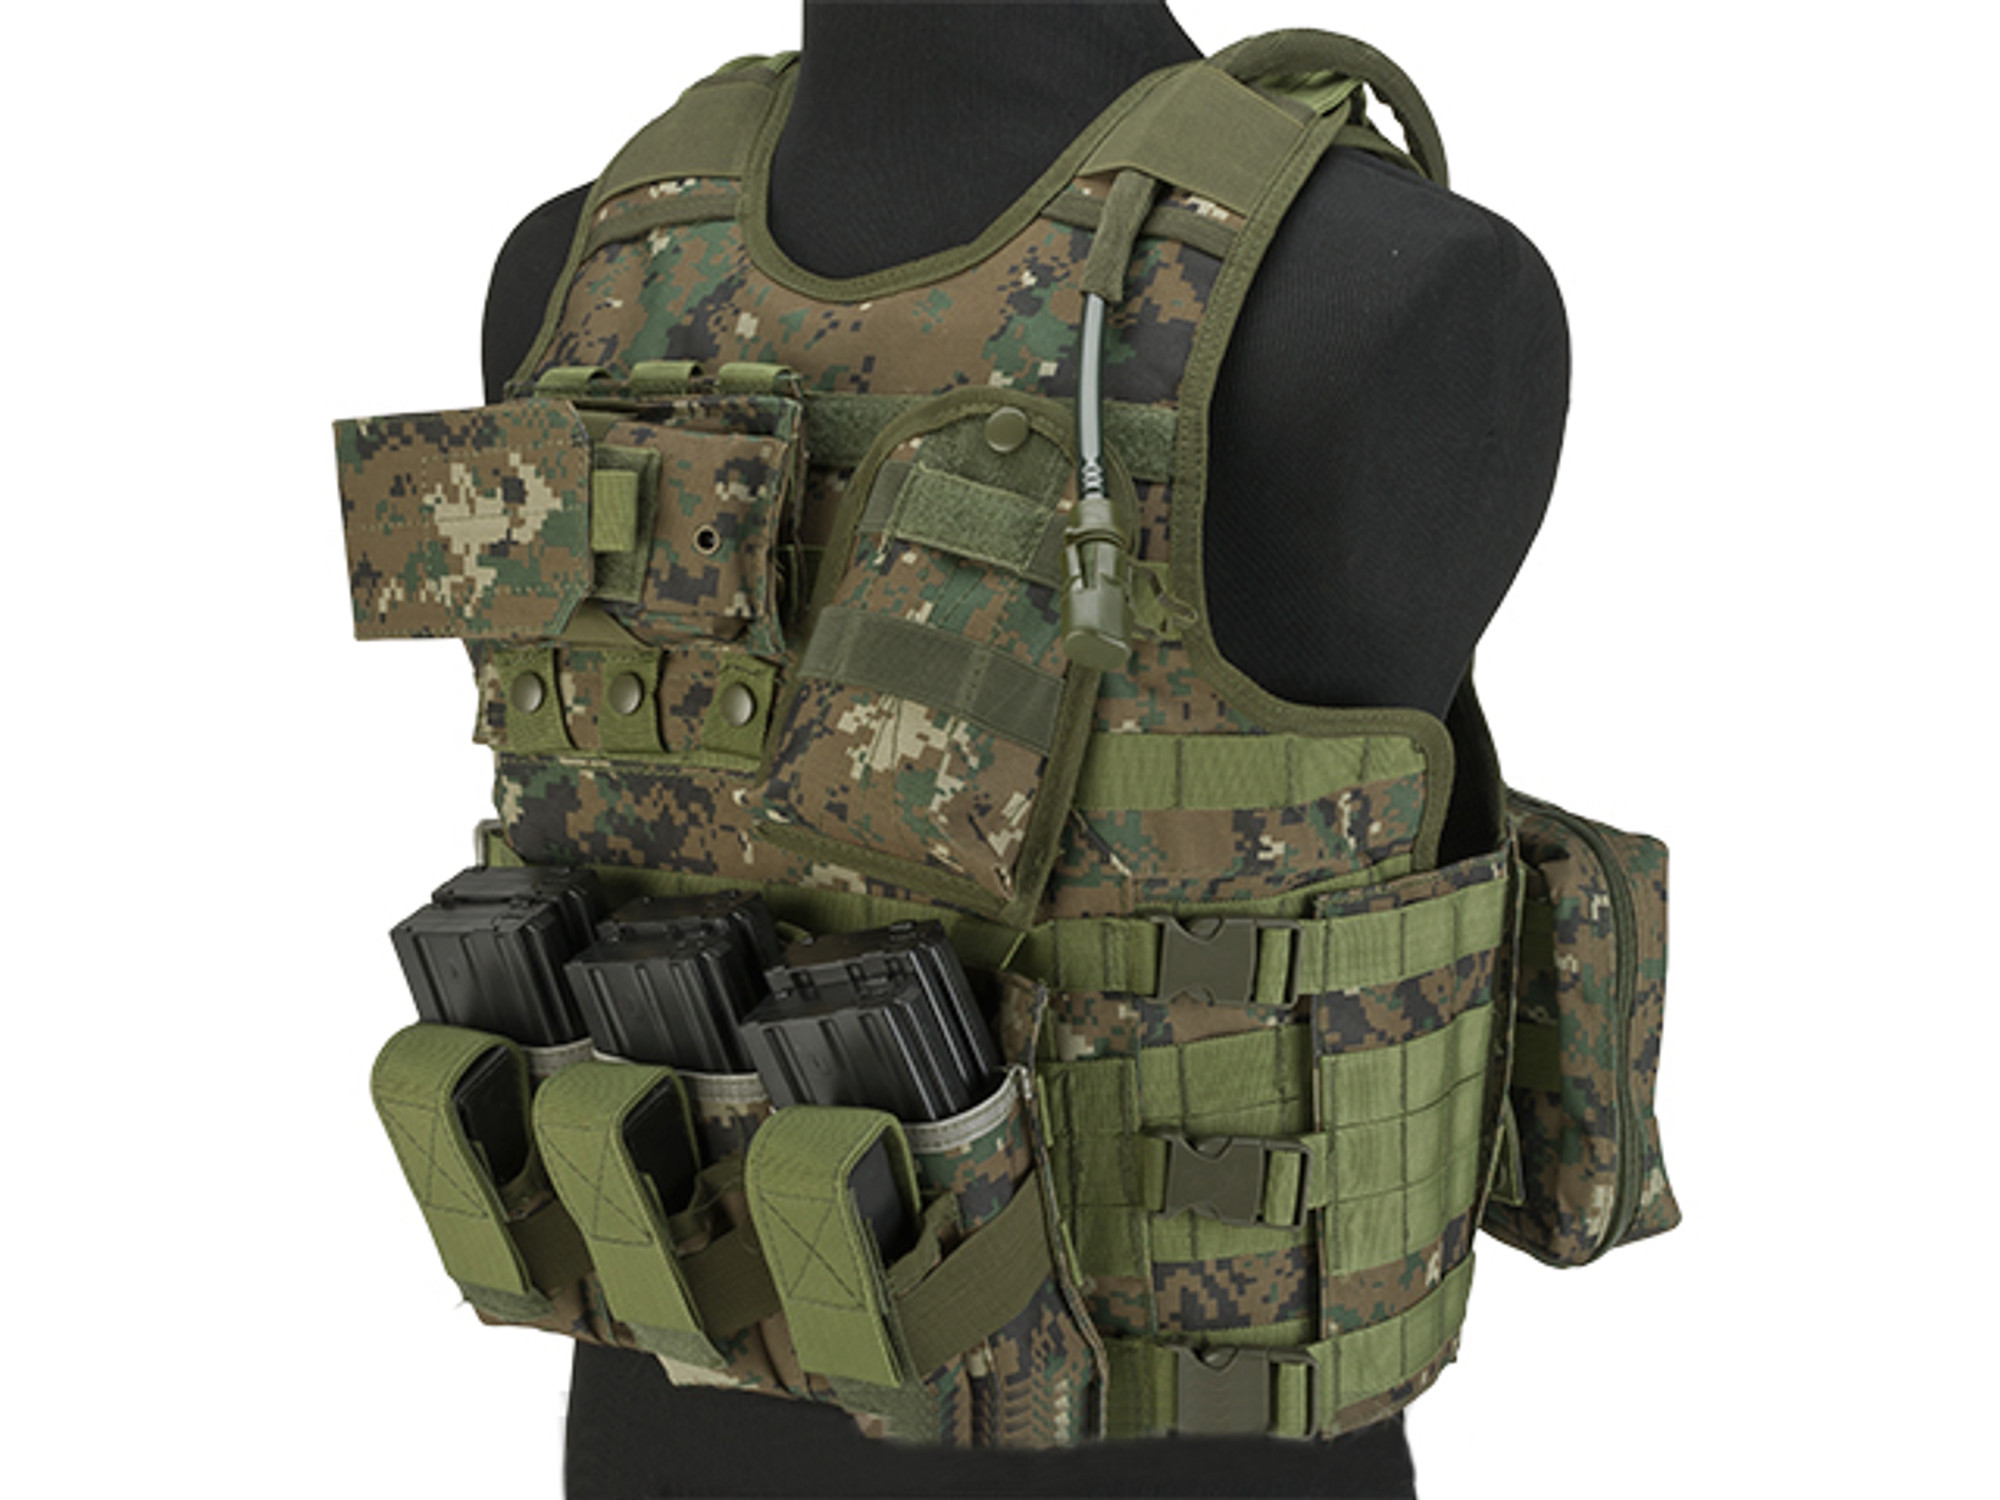 Matrix MEA Tactical Vest with M4 Magazine Pouches and Hydration Bladder - Digital Woodland